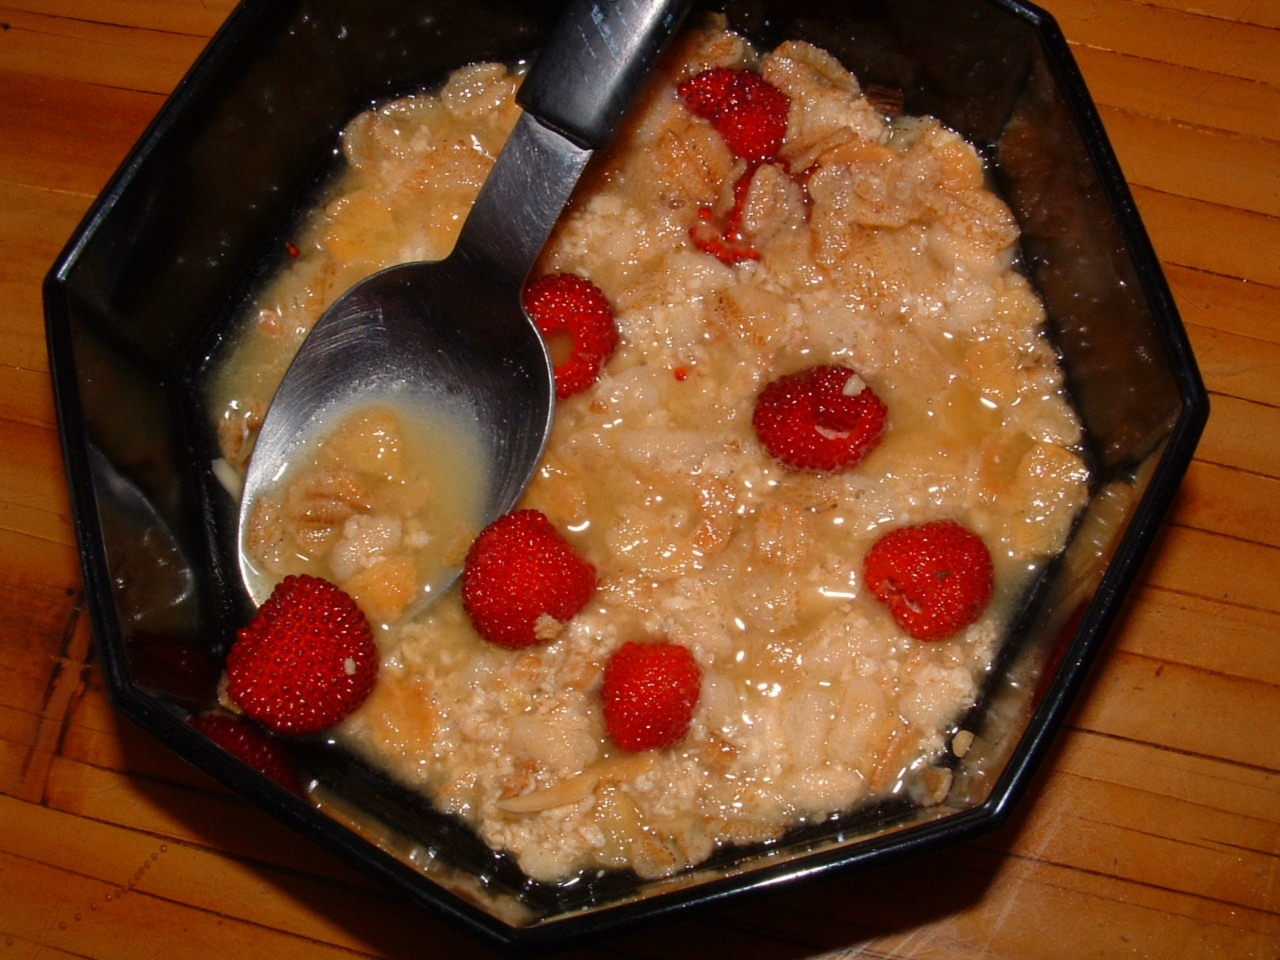 Eating foods such as oatmeal for breakfast can keep us energized longer. (Photo courtesy of puravida at Morguefile.com)